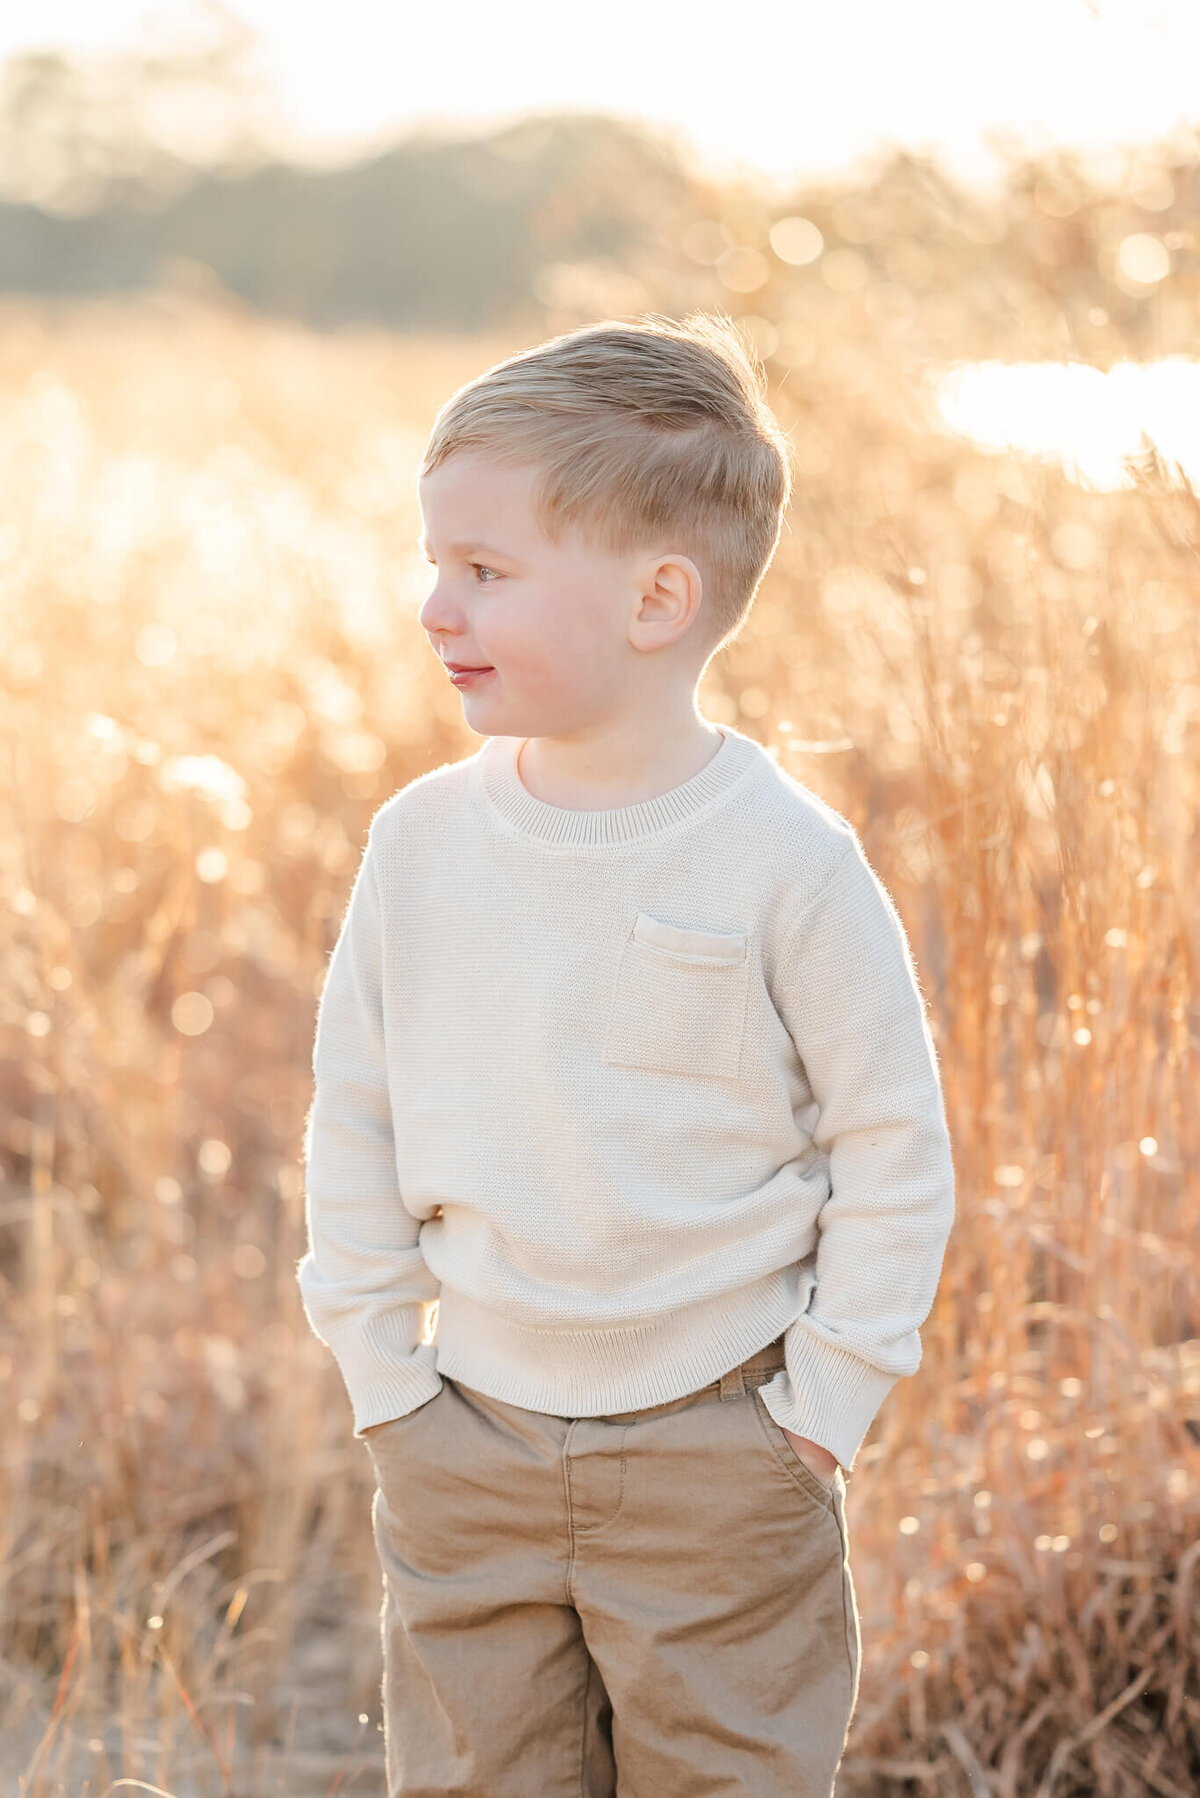 A young boy, wearing khakis and an off white top, puts his hands in his pockets and looks off to the side. He is standing in a field of brown grass with the sun shining behind him.